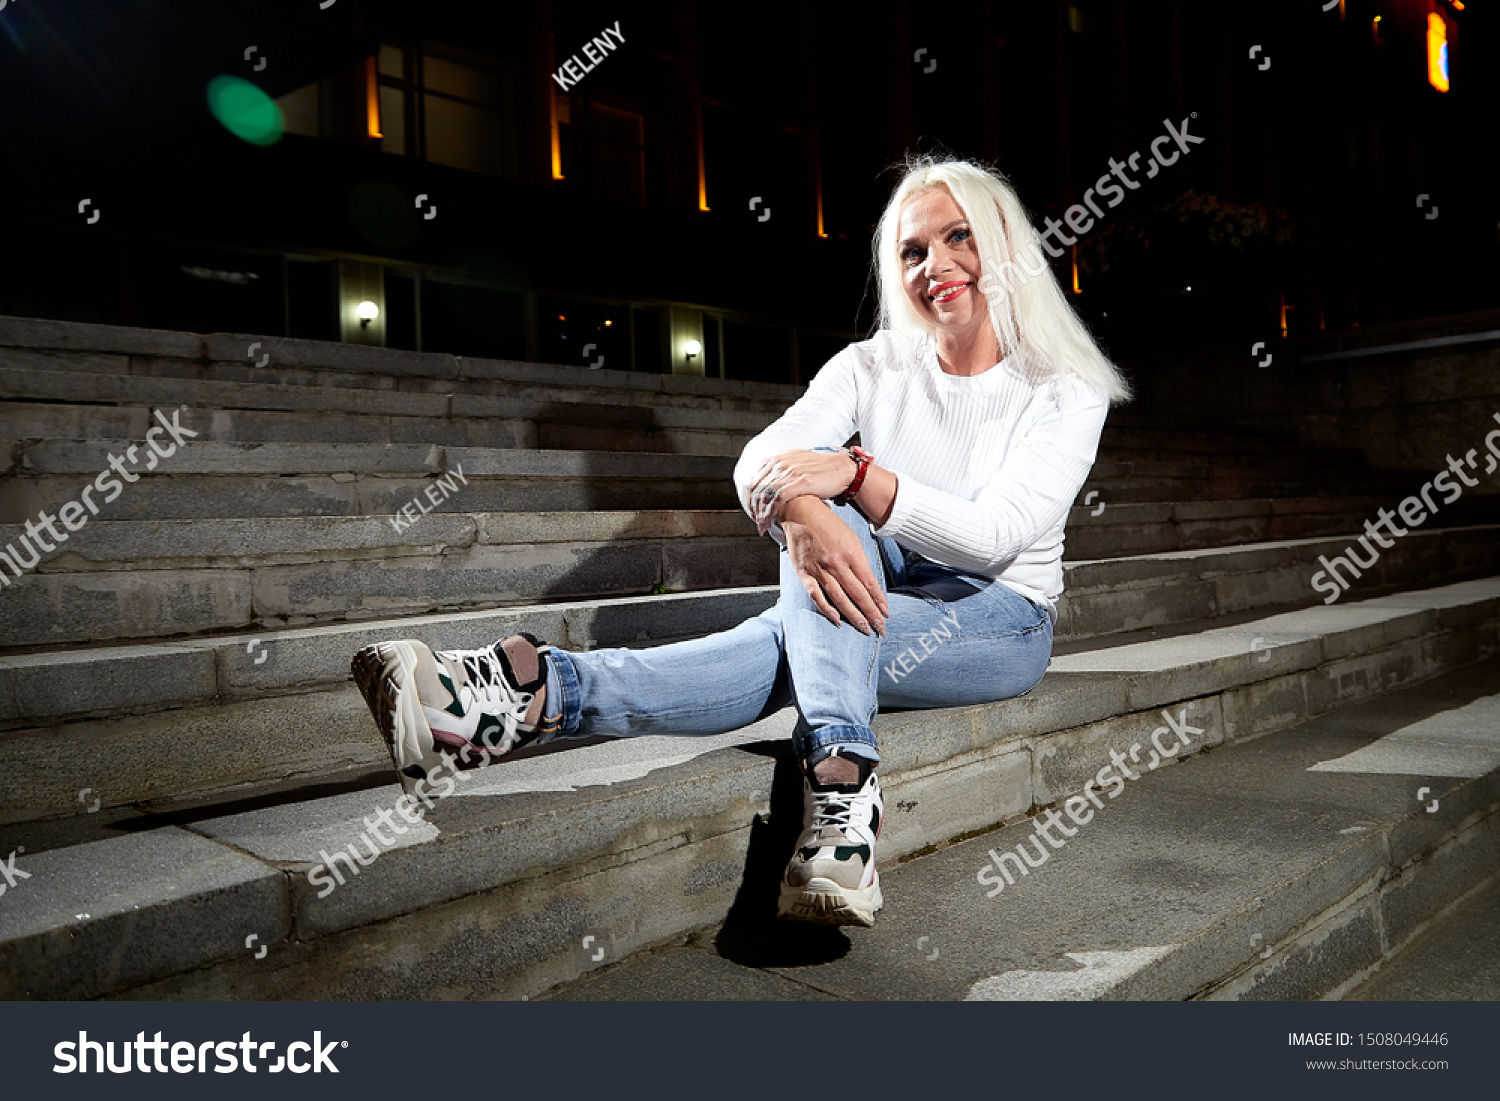 Ugly Woman White Blonde Hair On Stock Photo Edit Now 1508049446